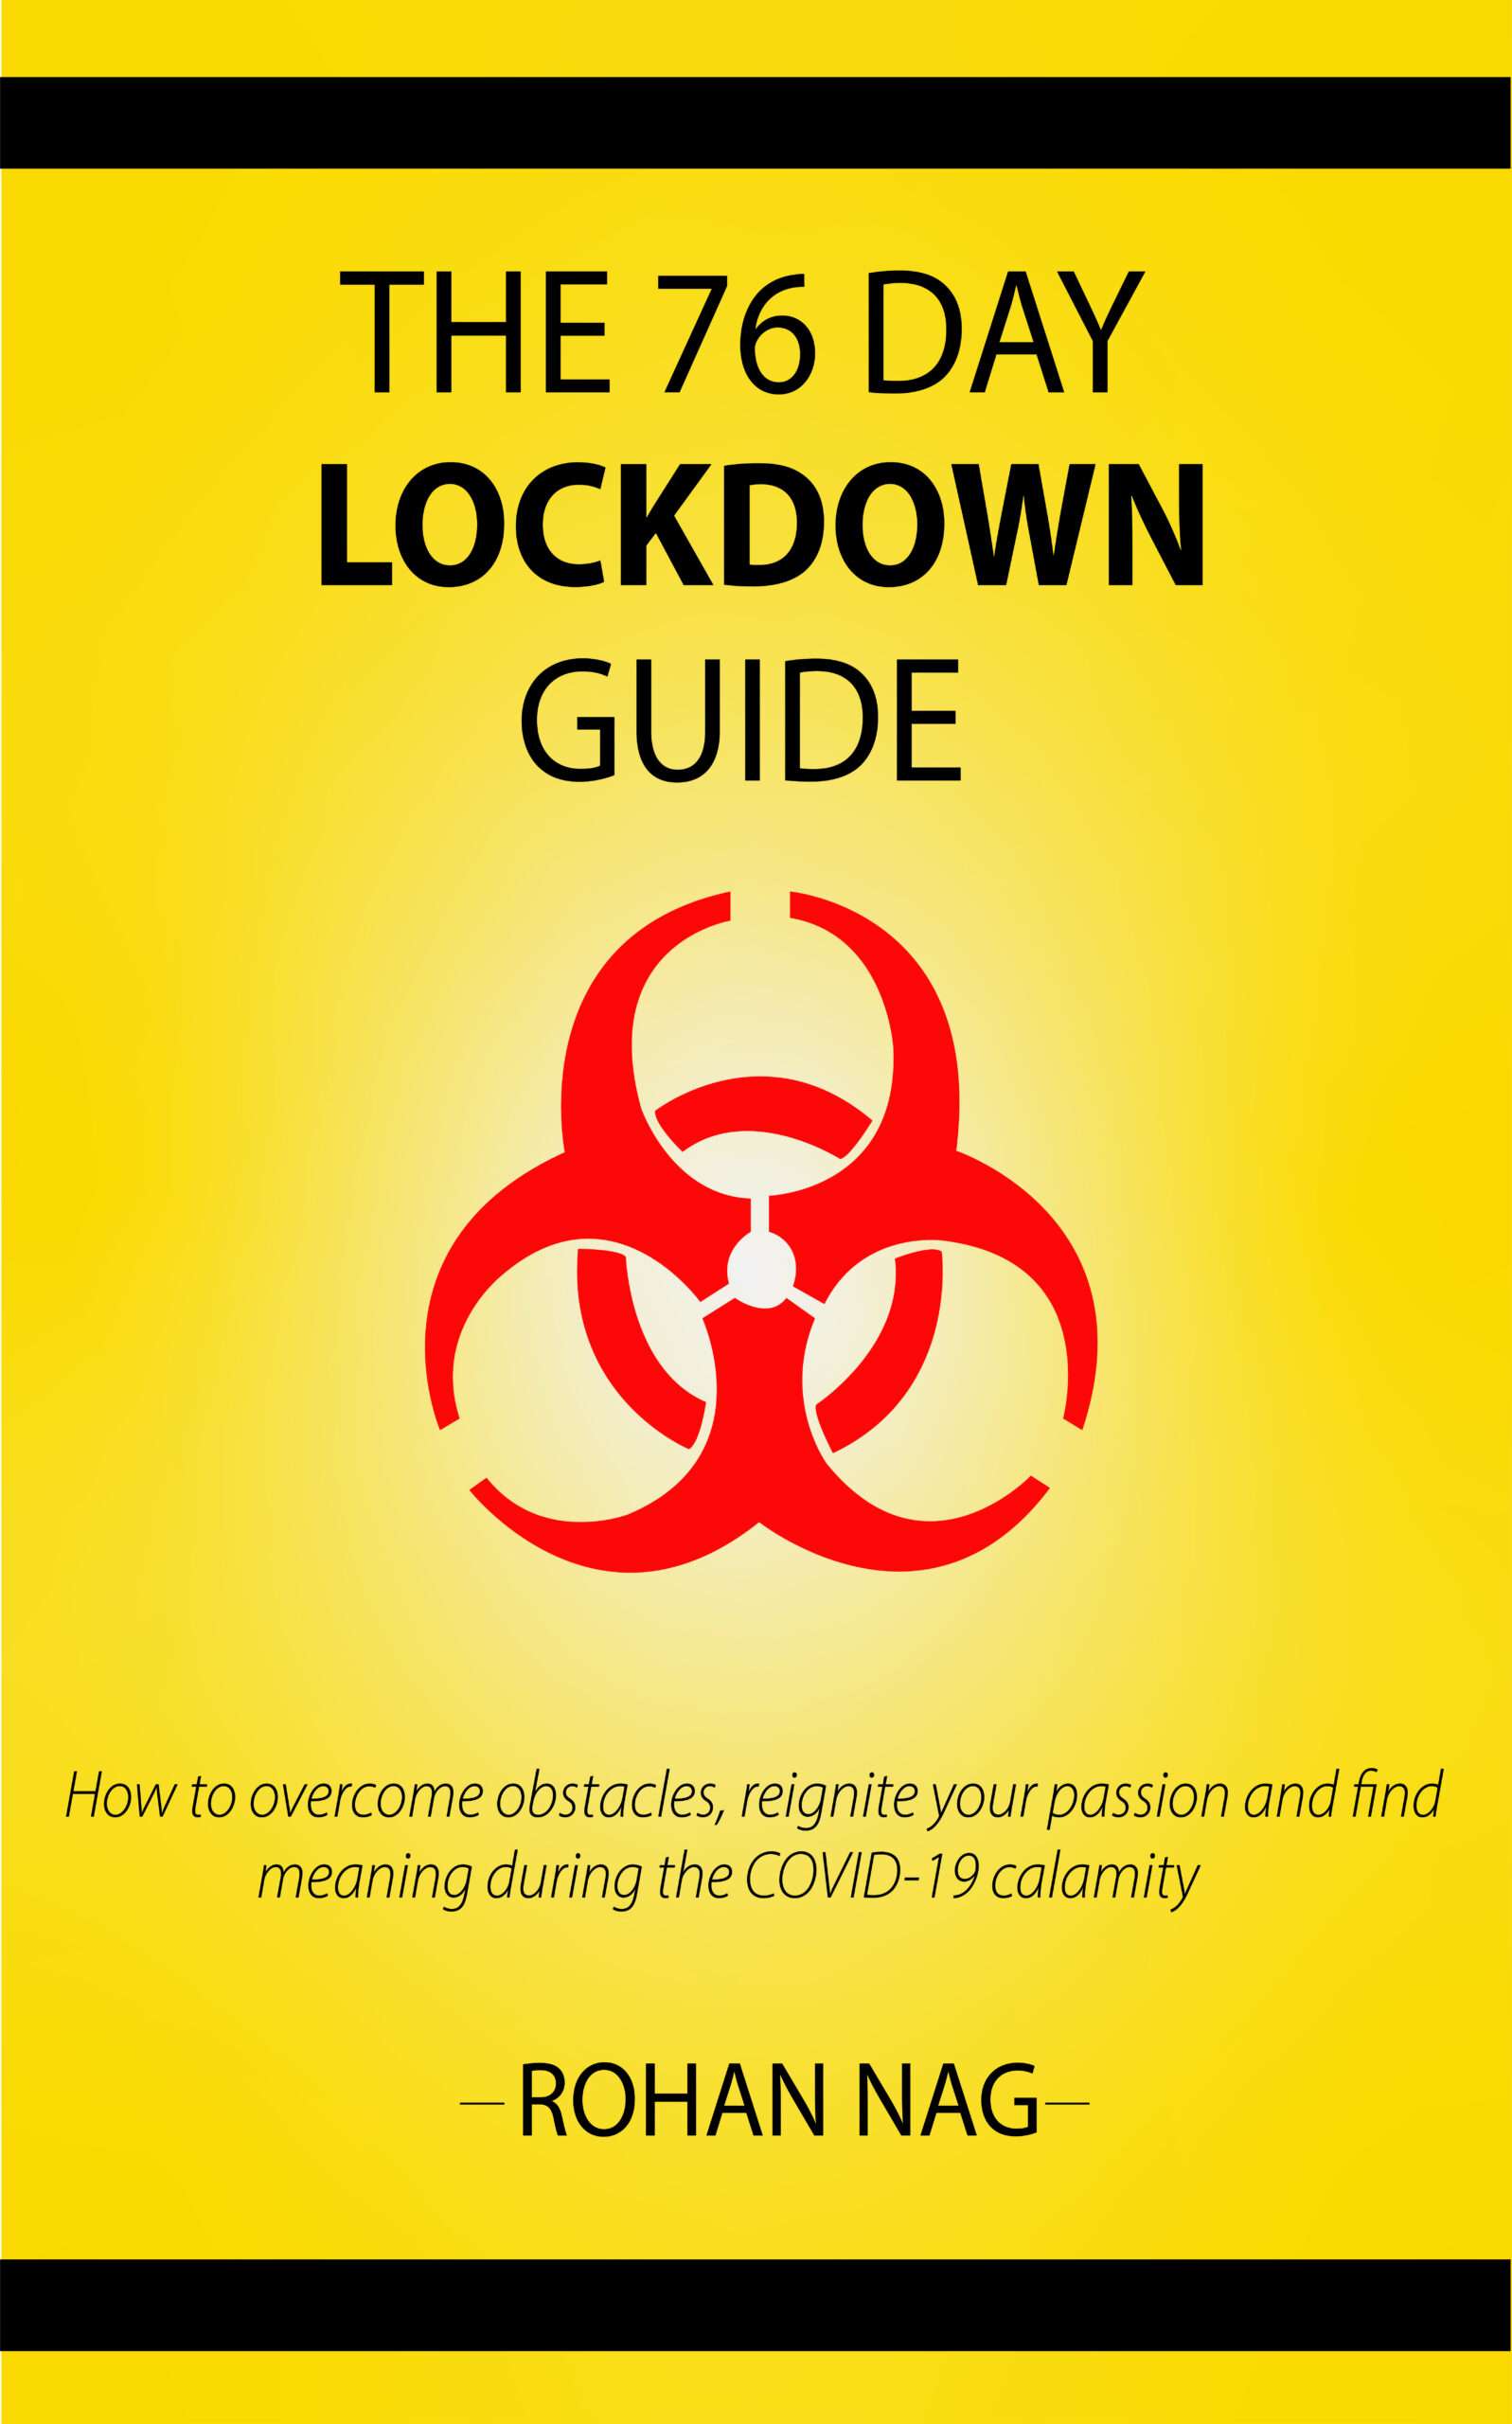 FREE: The 76 Day Lockdown Guide:  How to overcome obstacles, reignite your passion and find meaning during the COVID-19 Calamity by Rohan Nag